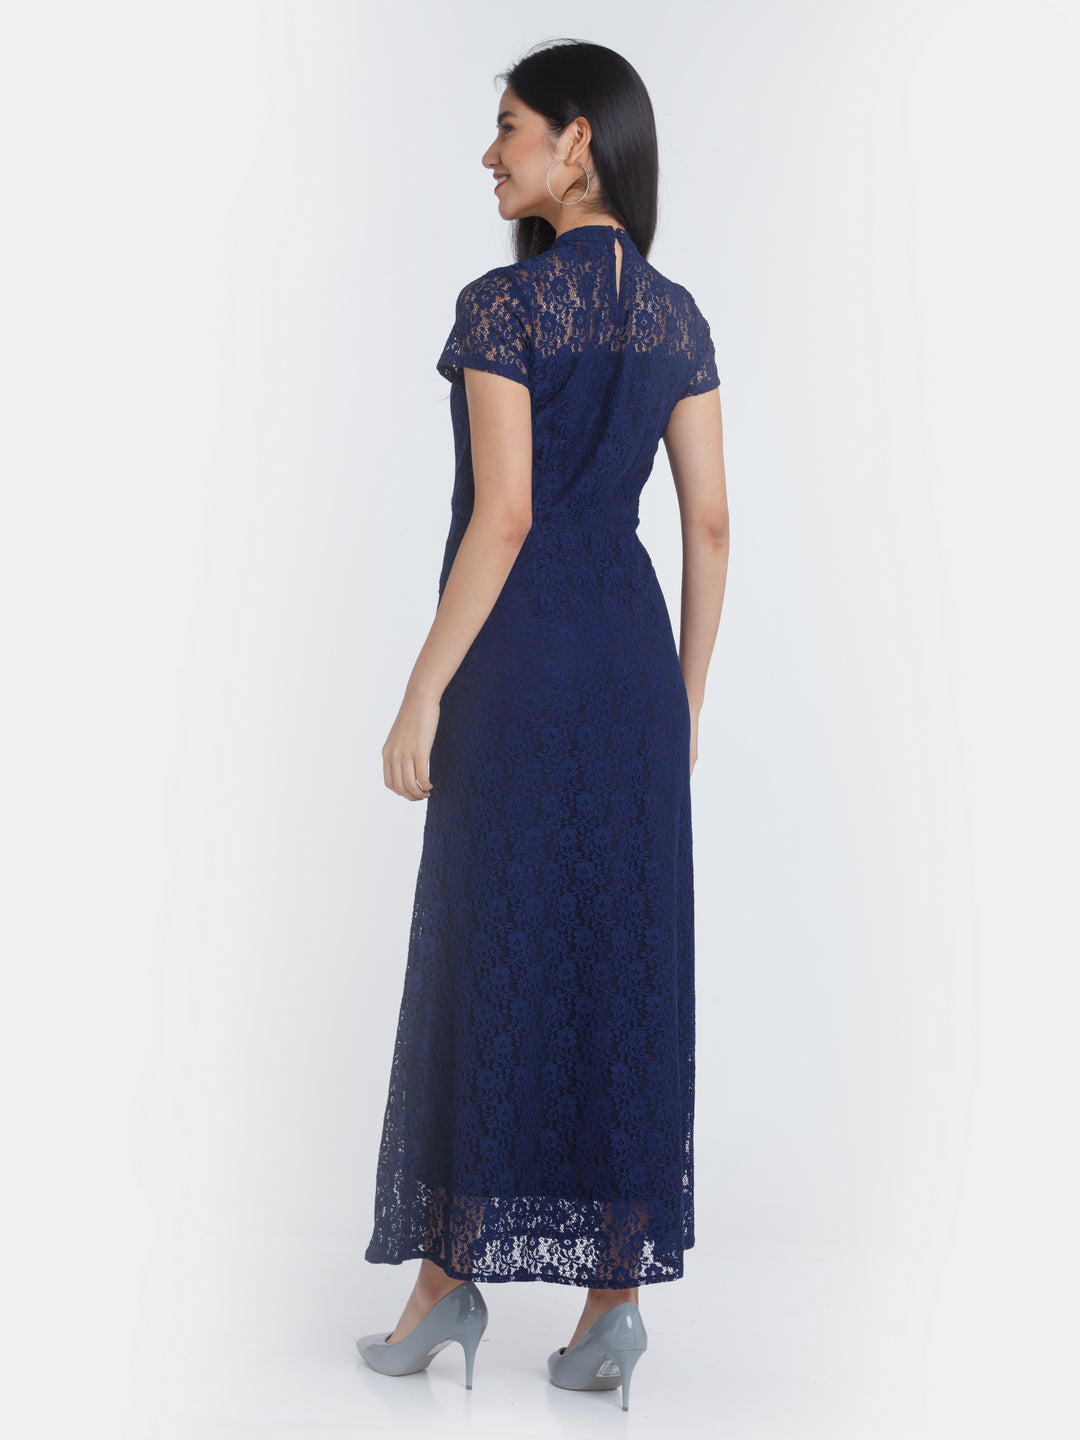 Navy Blue Lace Maxi Dress For Women